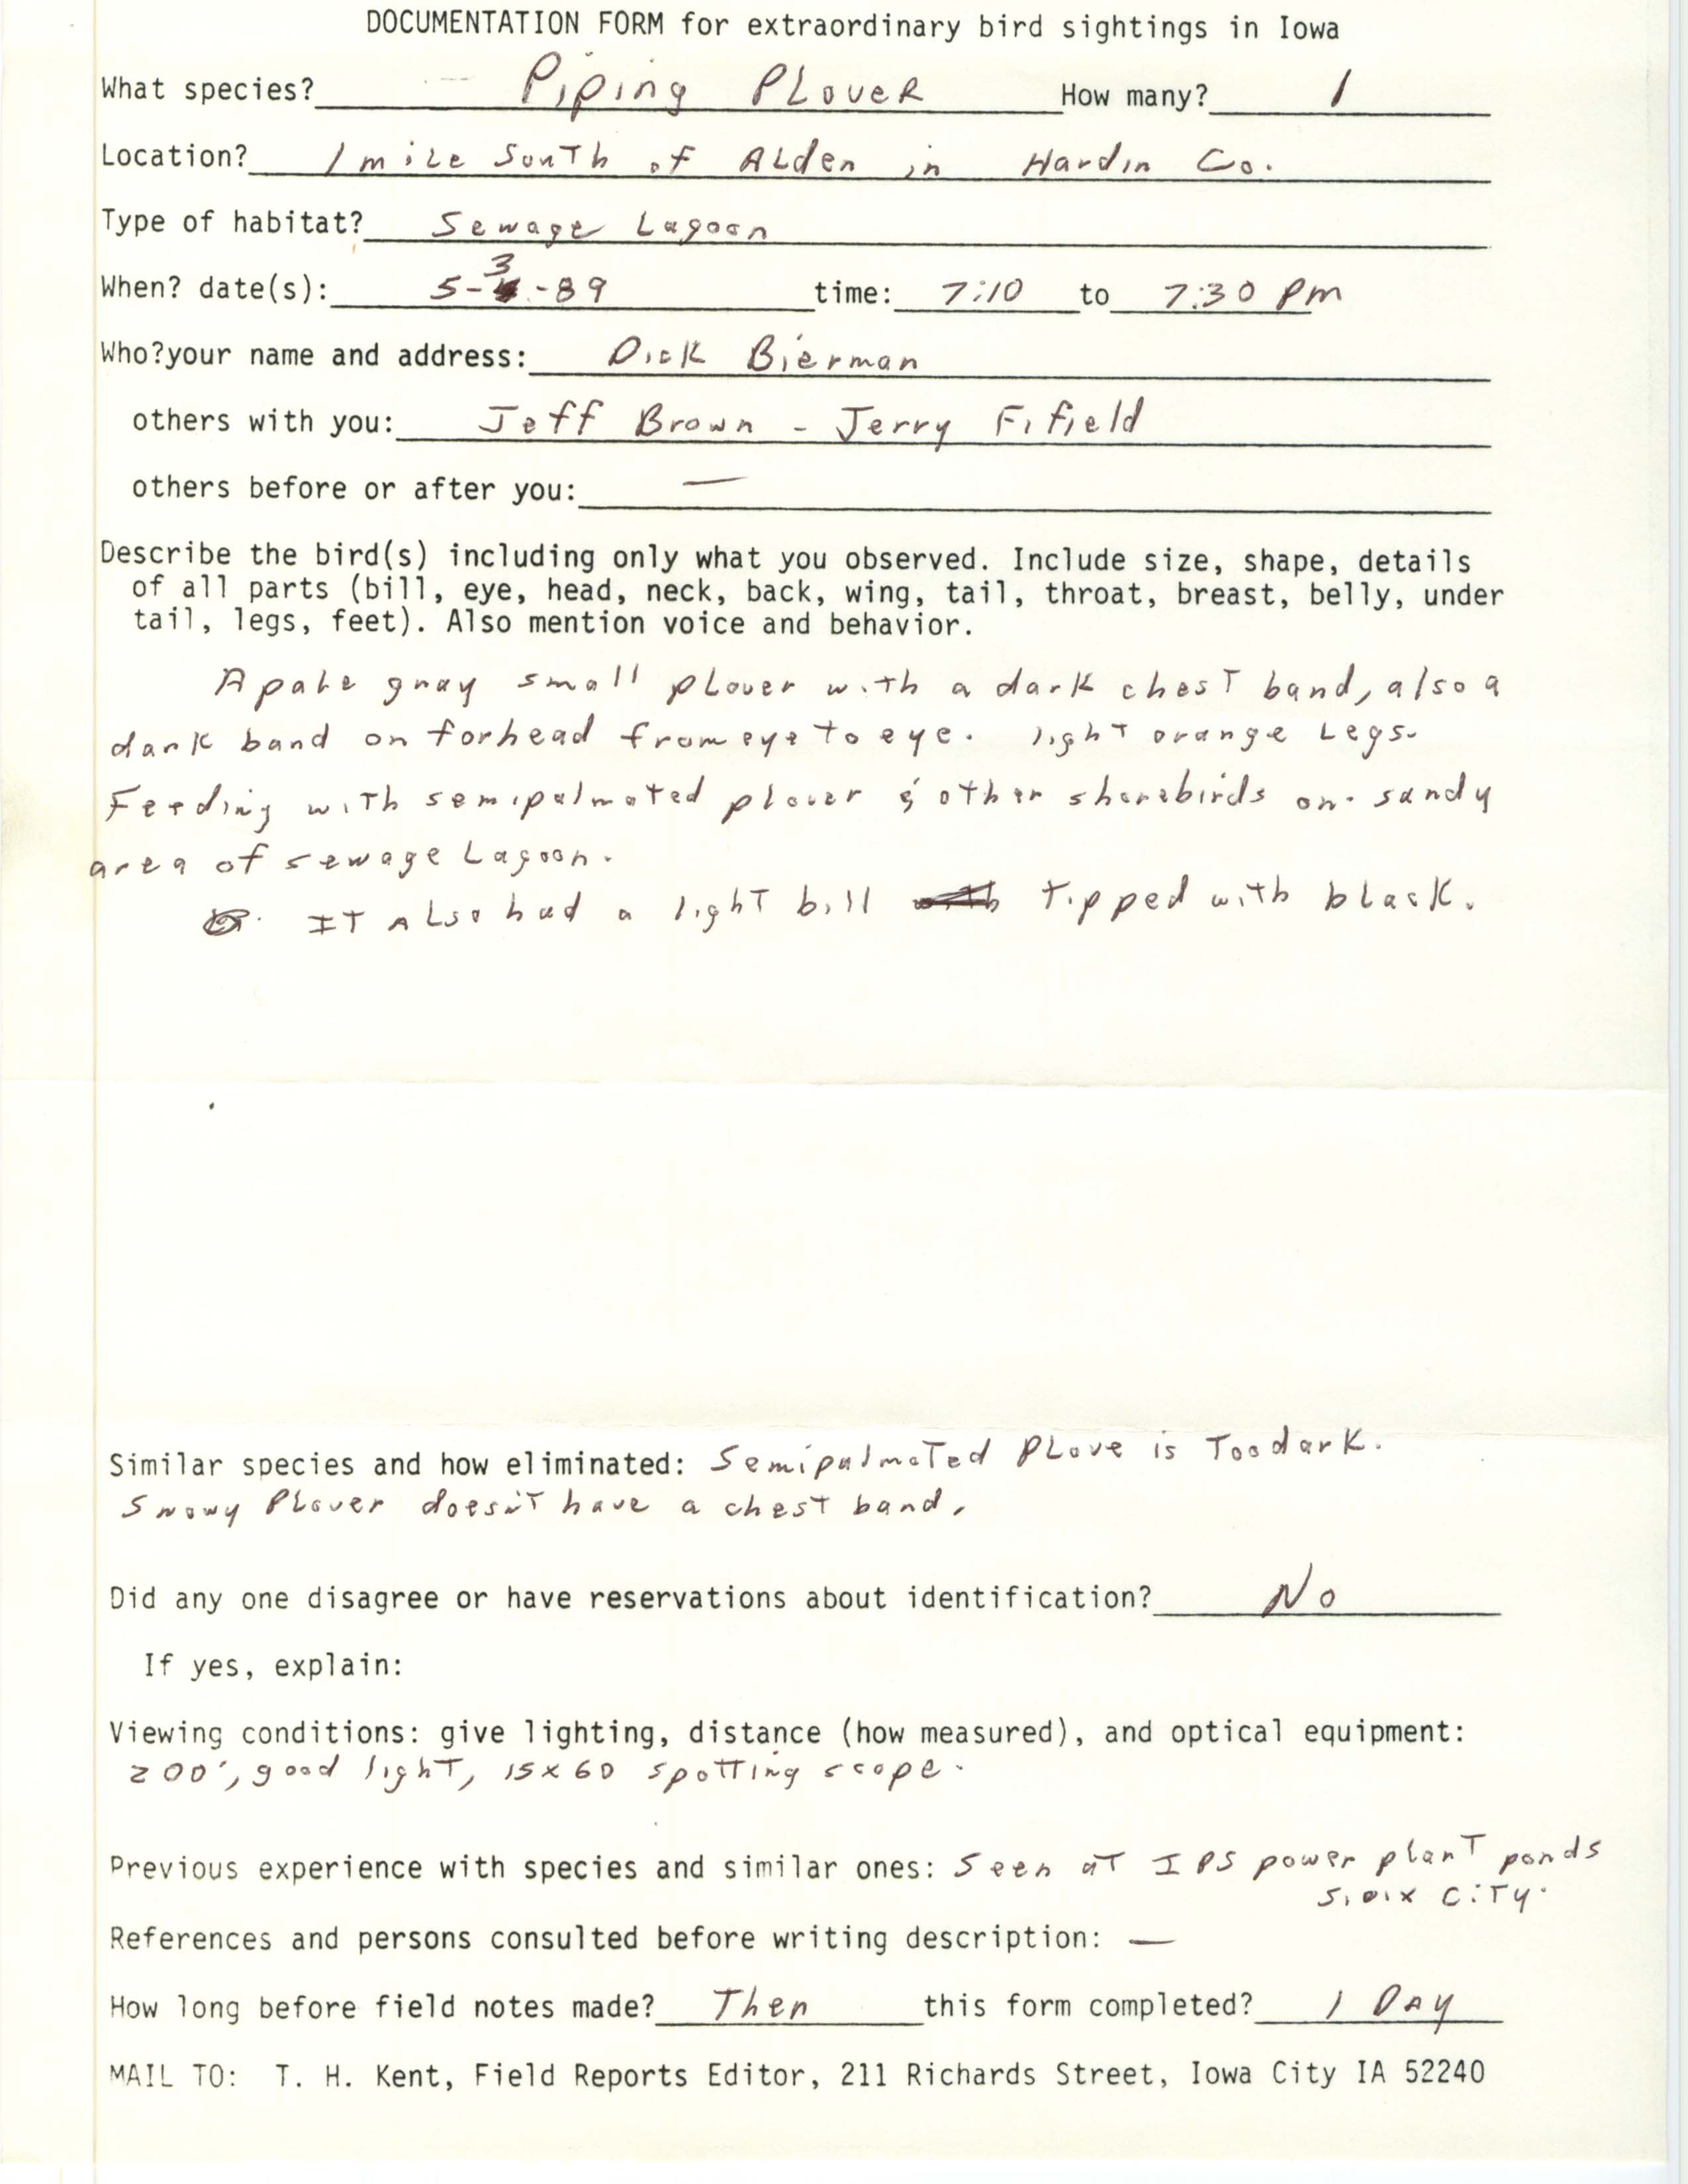 Rare bird documentation form for Piping Plover south of Alden, 1989